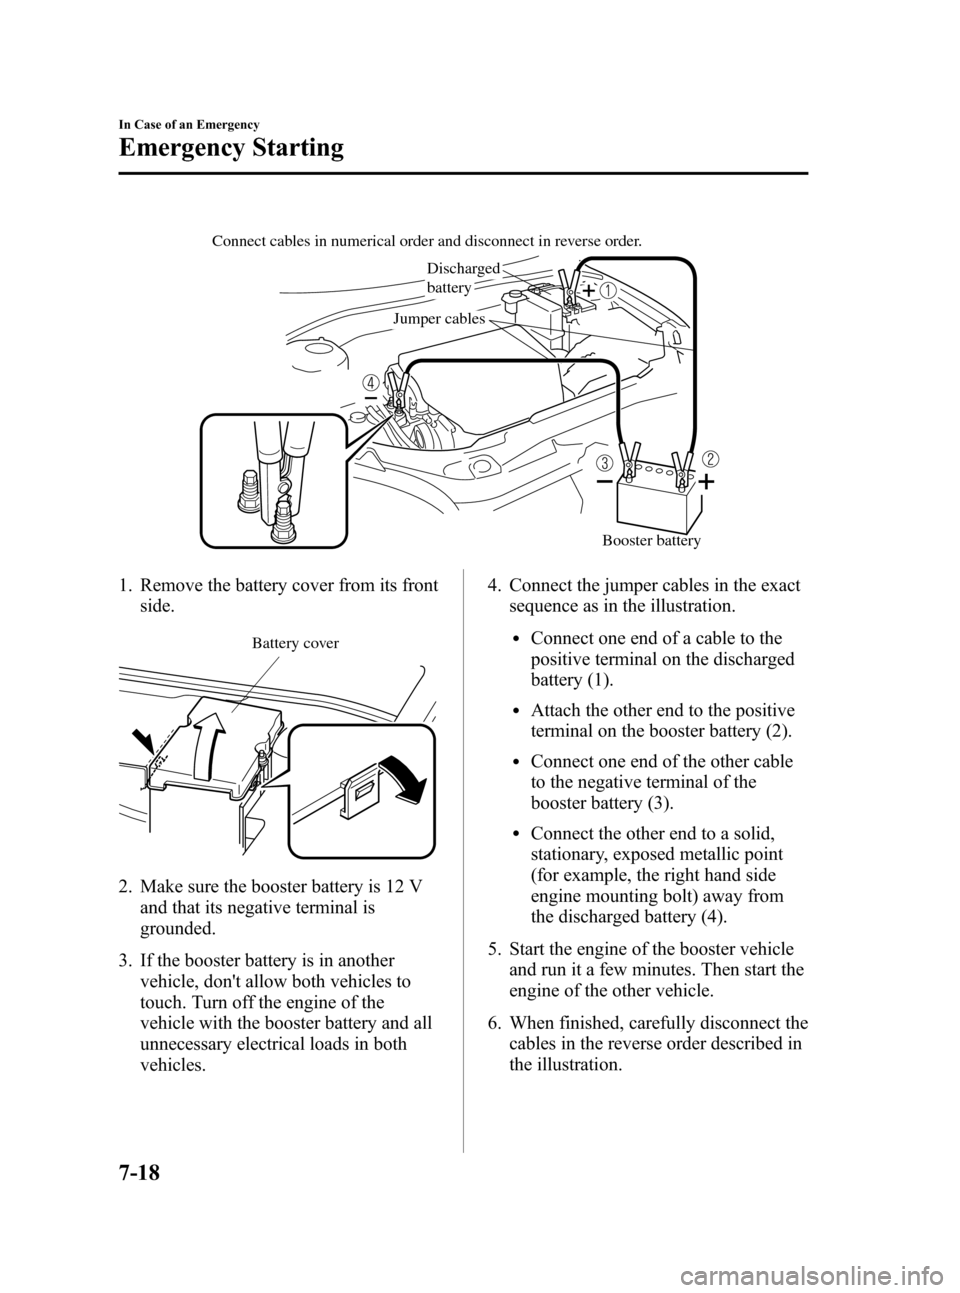 MAZDA MODEL 3 HATCHBACK 2007   (in English) Owners Guide Black plate (270,1)
Discharged 
battery
Jumper cables Connect cables in numerical order and disconnect in reverse order.
Booster battery
1. Remove the battery cover from its front
side.
Battery cover
